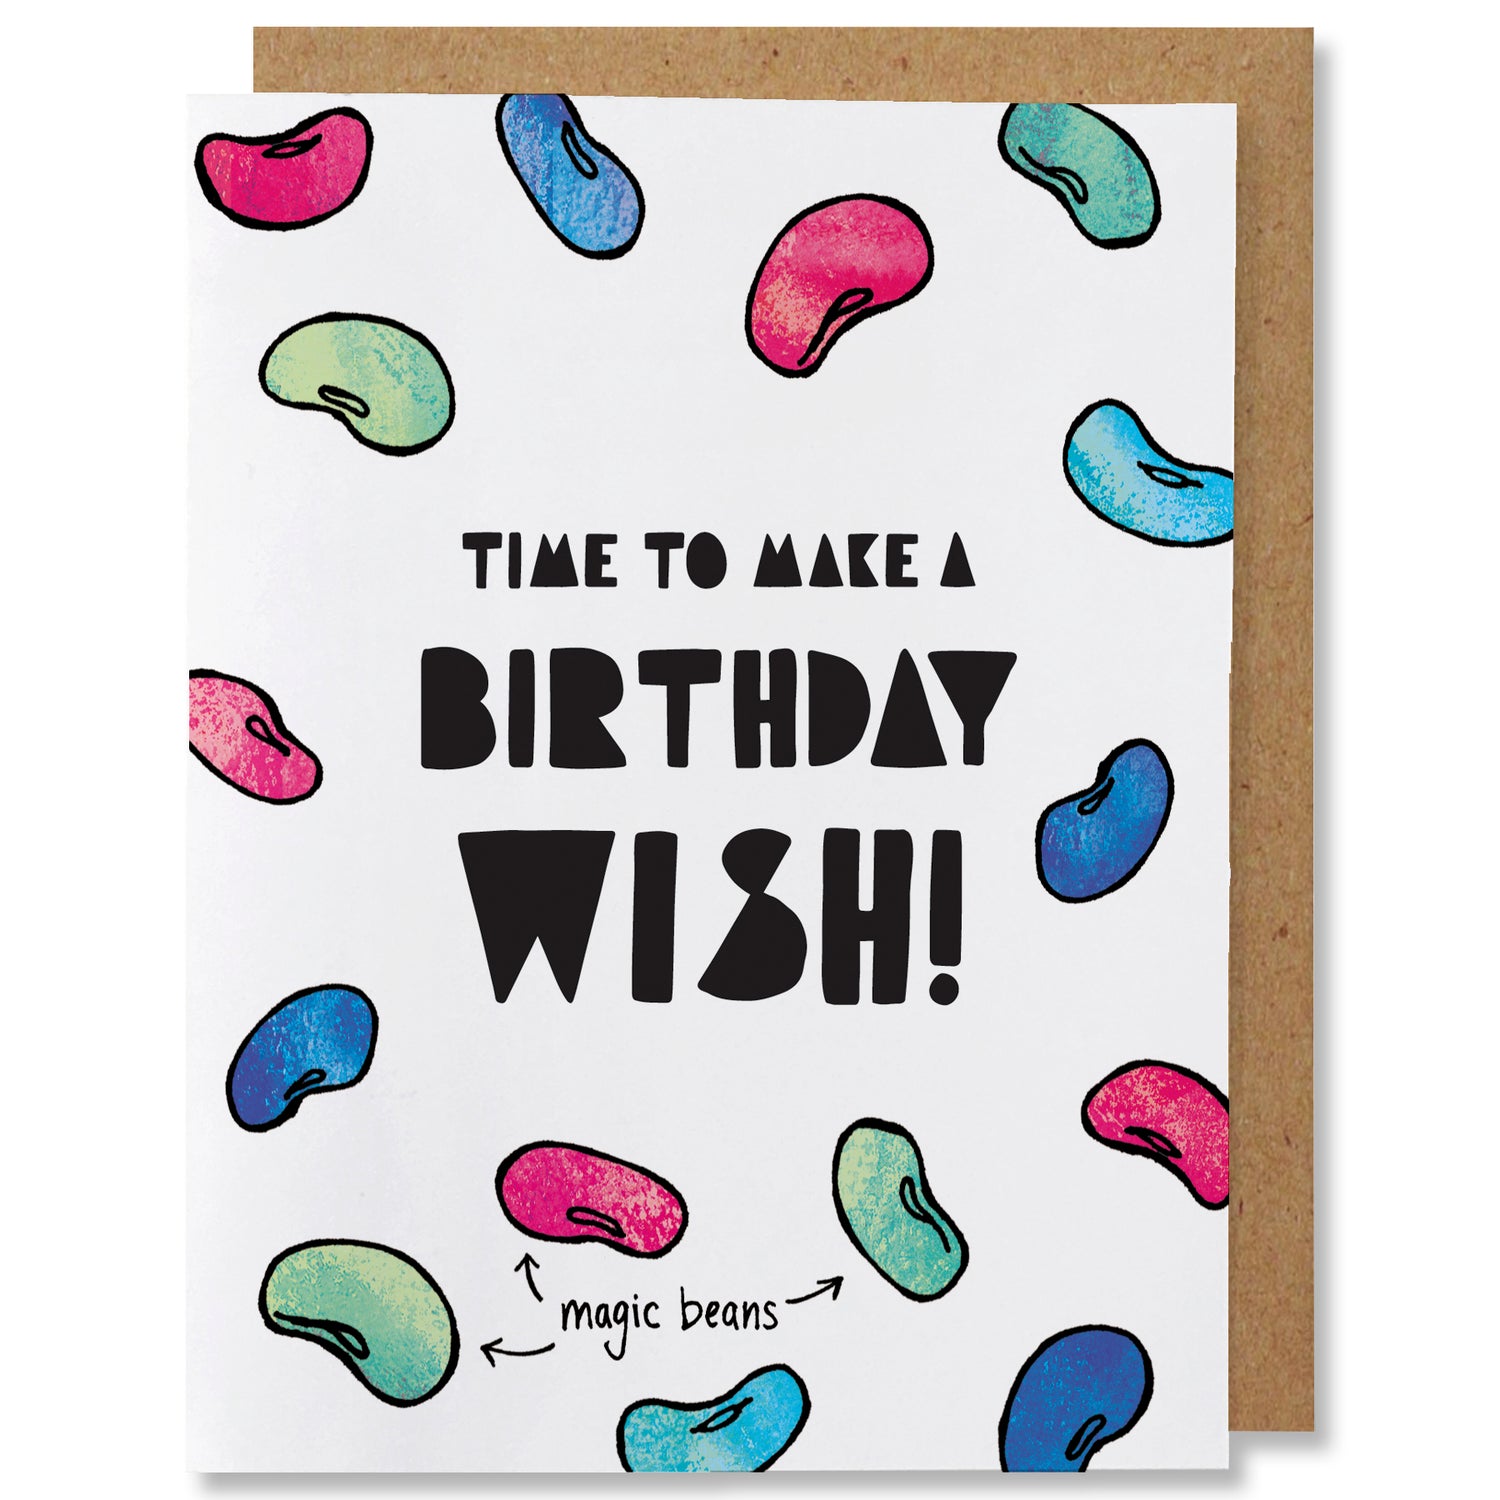 Illustrated Birthday greeting card saying “time to make a birthday wish” in black handlettering and features colorful magic beans in shades of red, blue, and green.